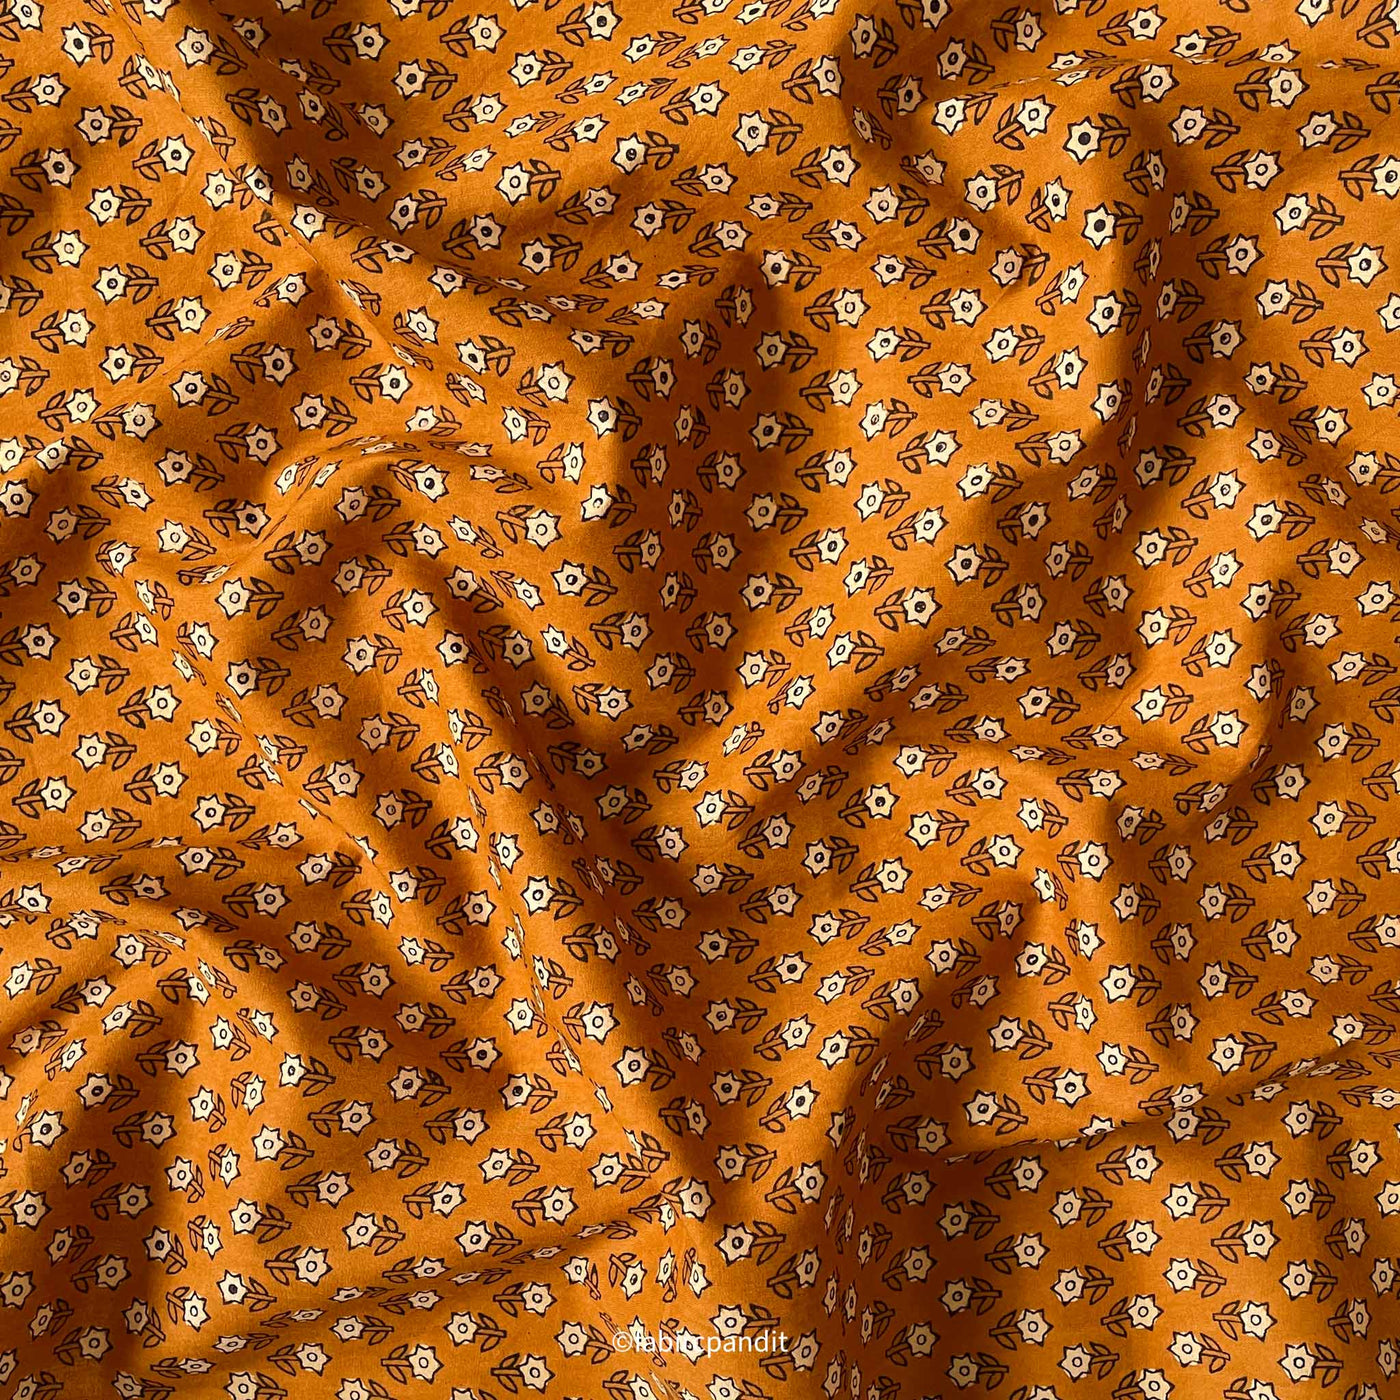 Fabric Pandit Cut Piece (CUT PIECE) Dusty Mustard Geometric Floral Hand Block Printed Pure Cotton Fabric (Width 43 inches)